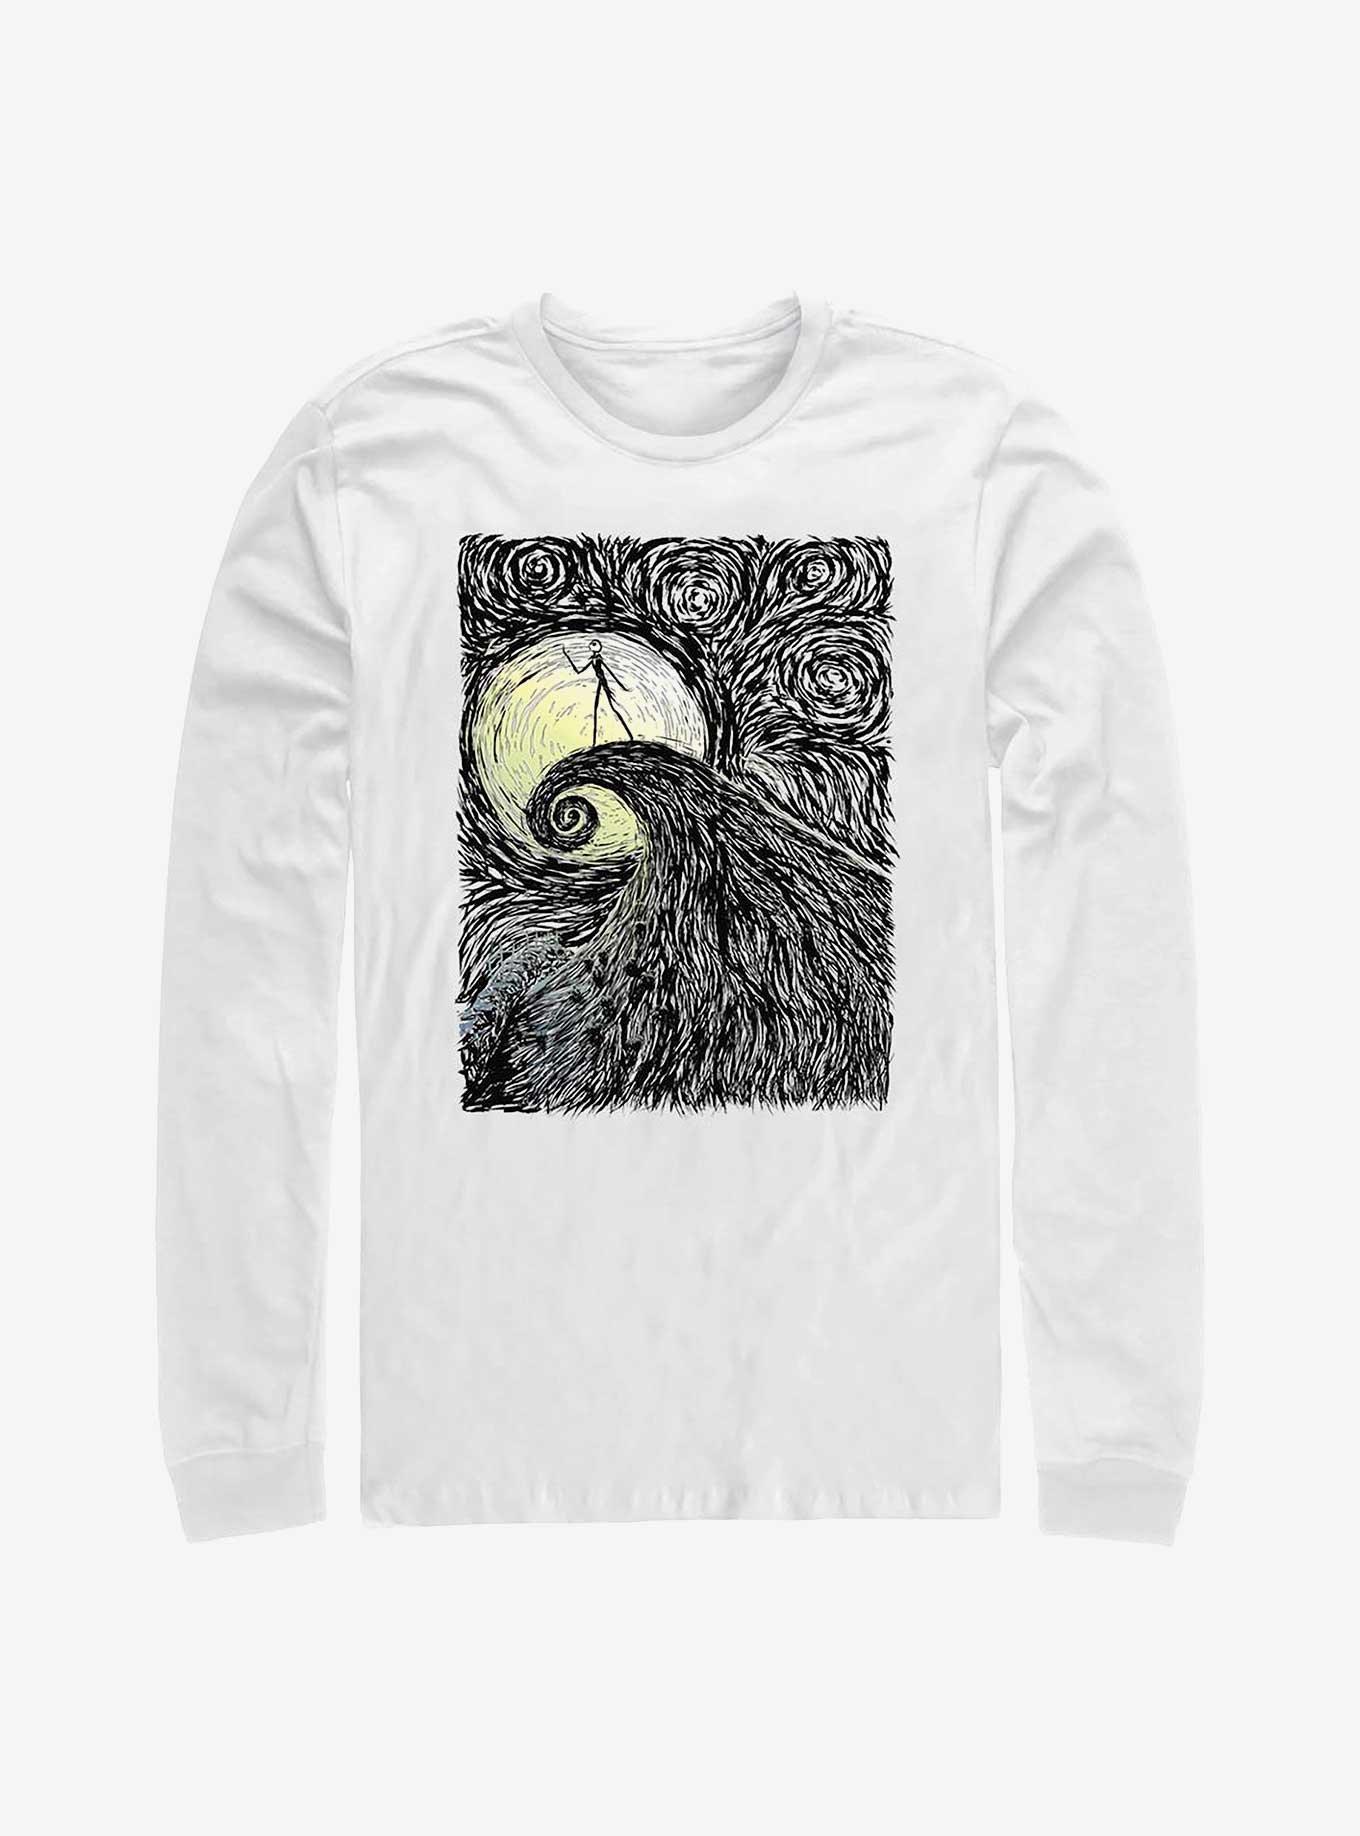 The Nightmare Before Christmas Spiral Hill Long-Sleeve T-Shirt, WHITE, hi-res